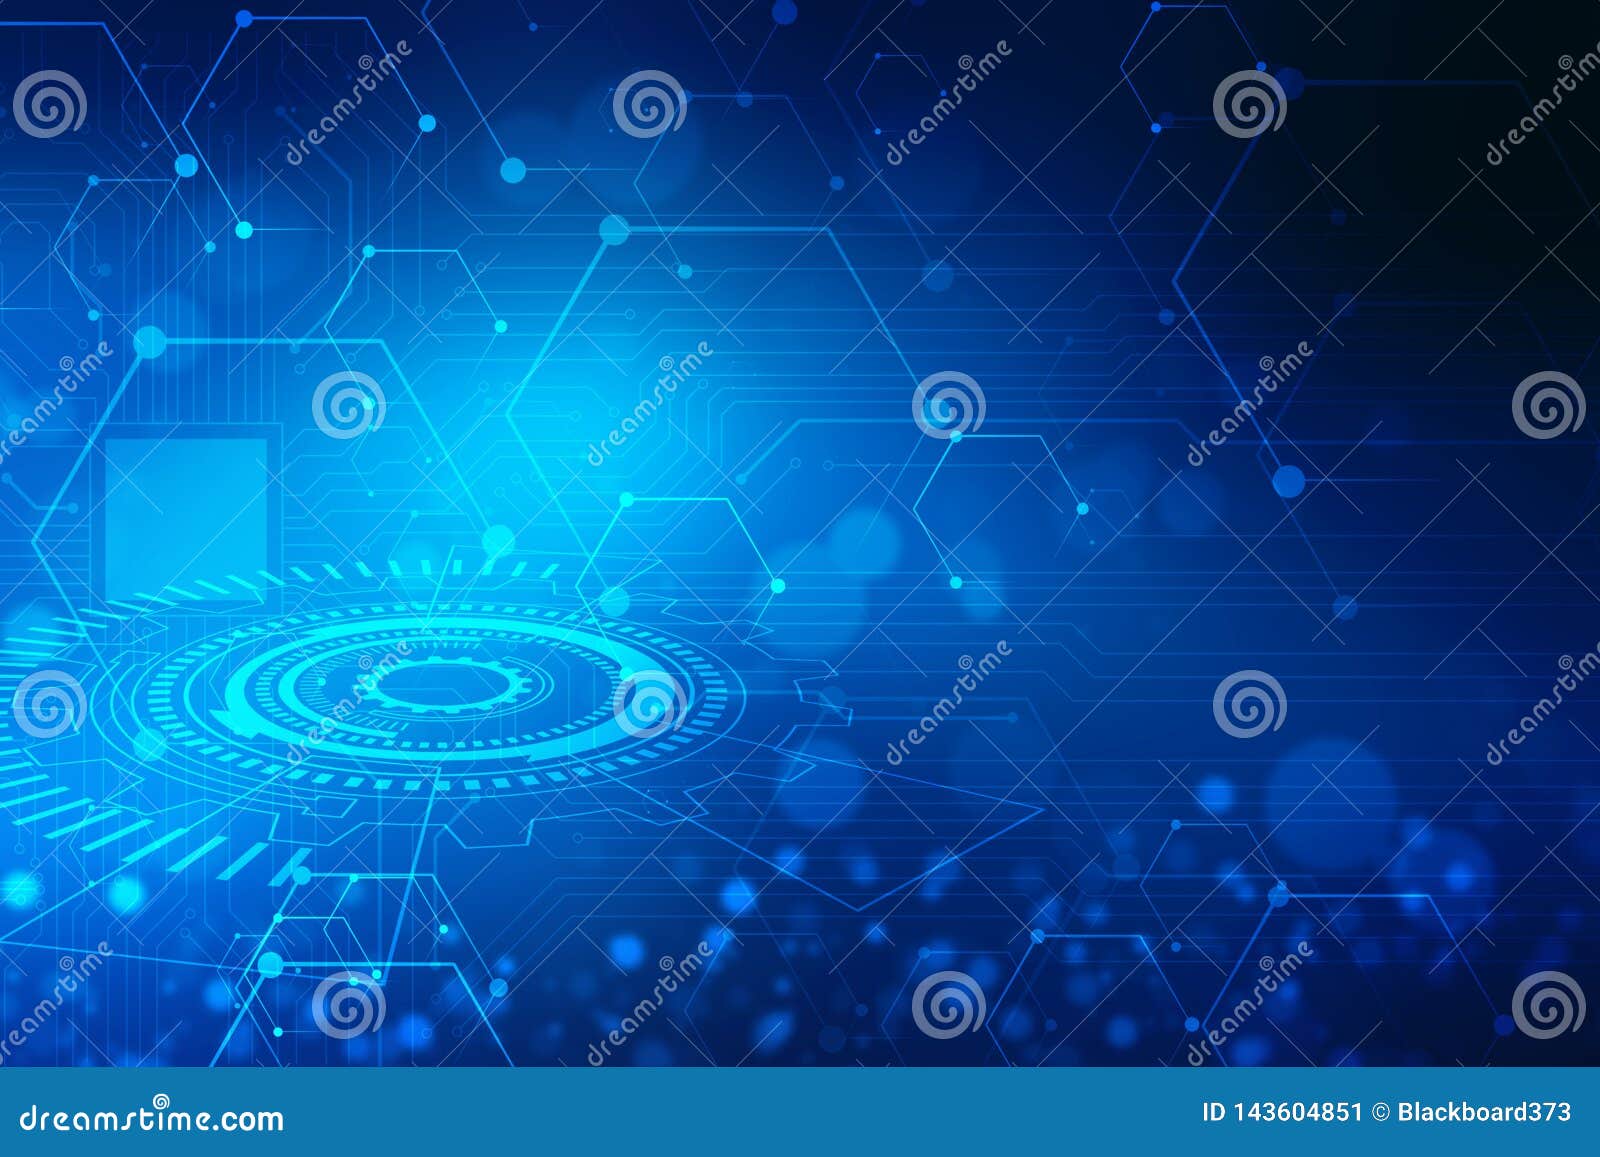 technology abstract background, futuristic background, cyberspace concept